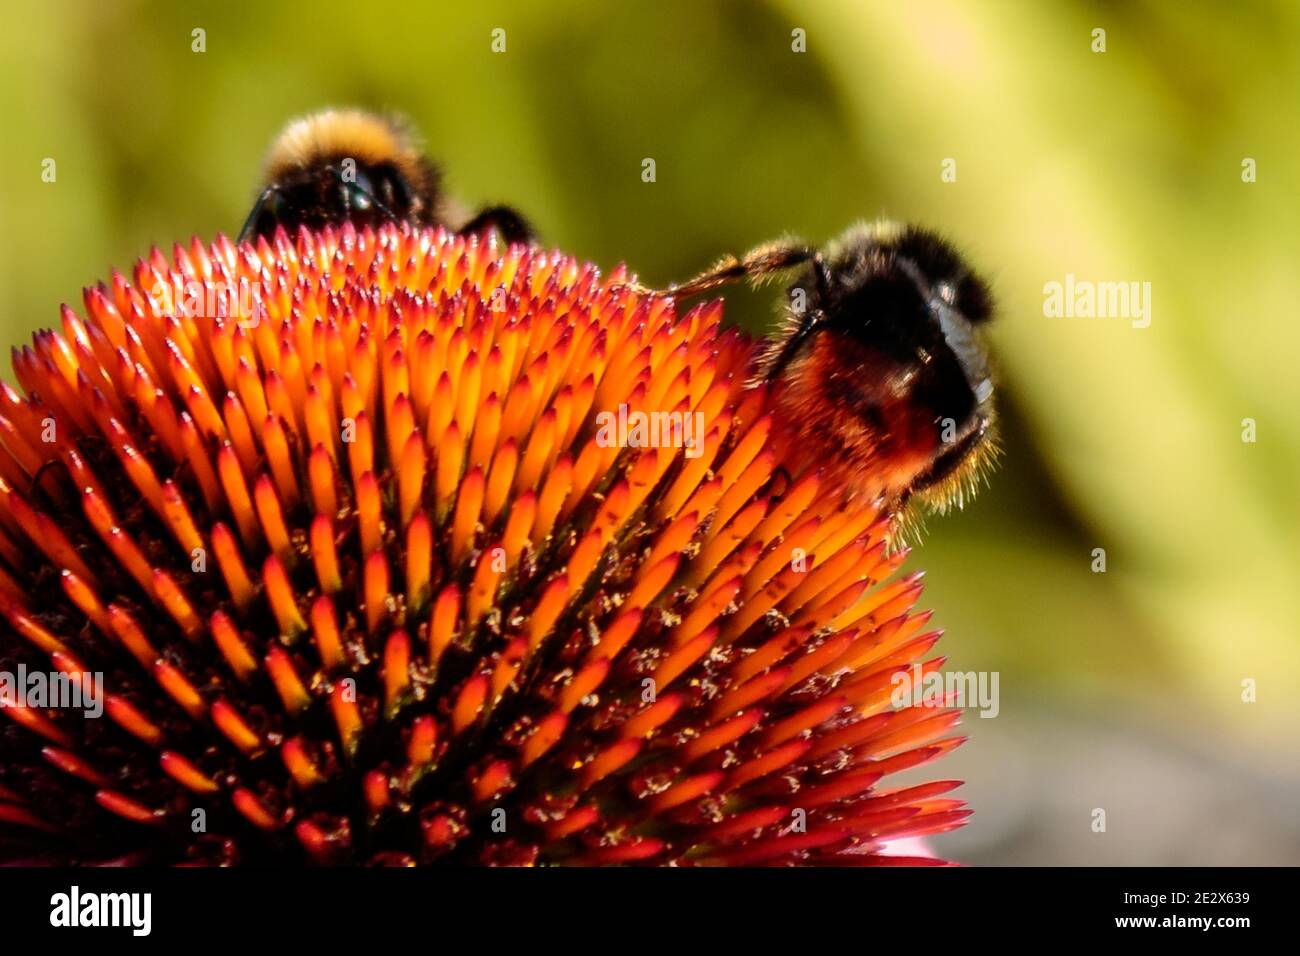 Extreme close up of two bees on coneflower blossom (Echinacea purpurea). Bees pollinating flower, close up Stock Photo